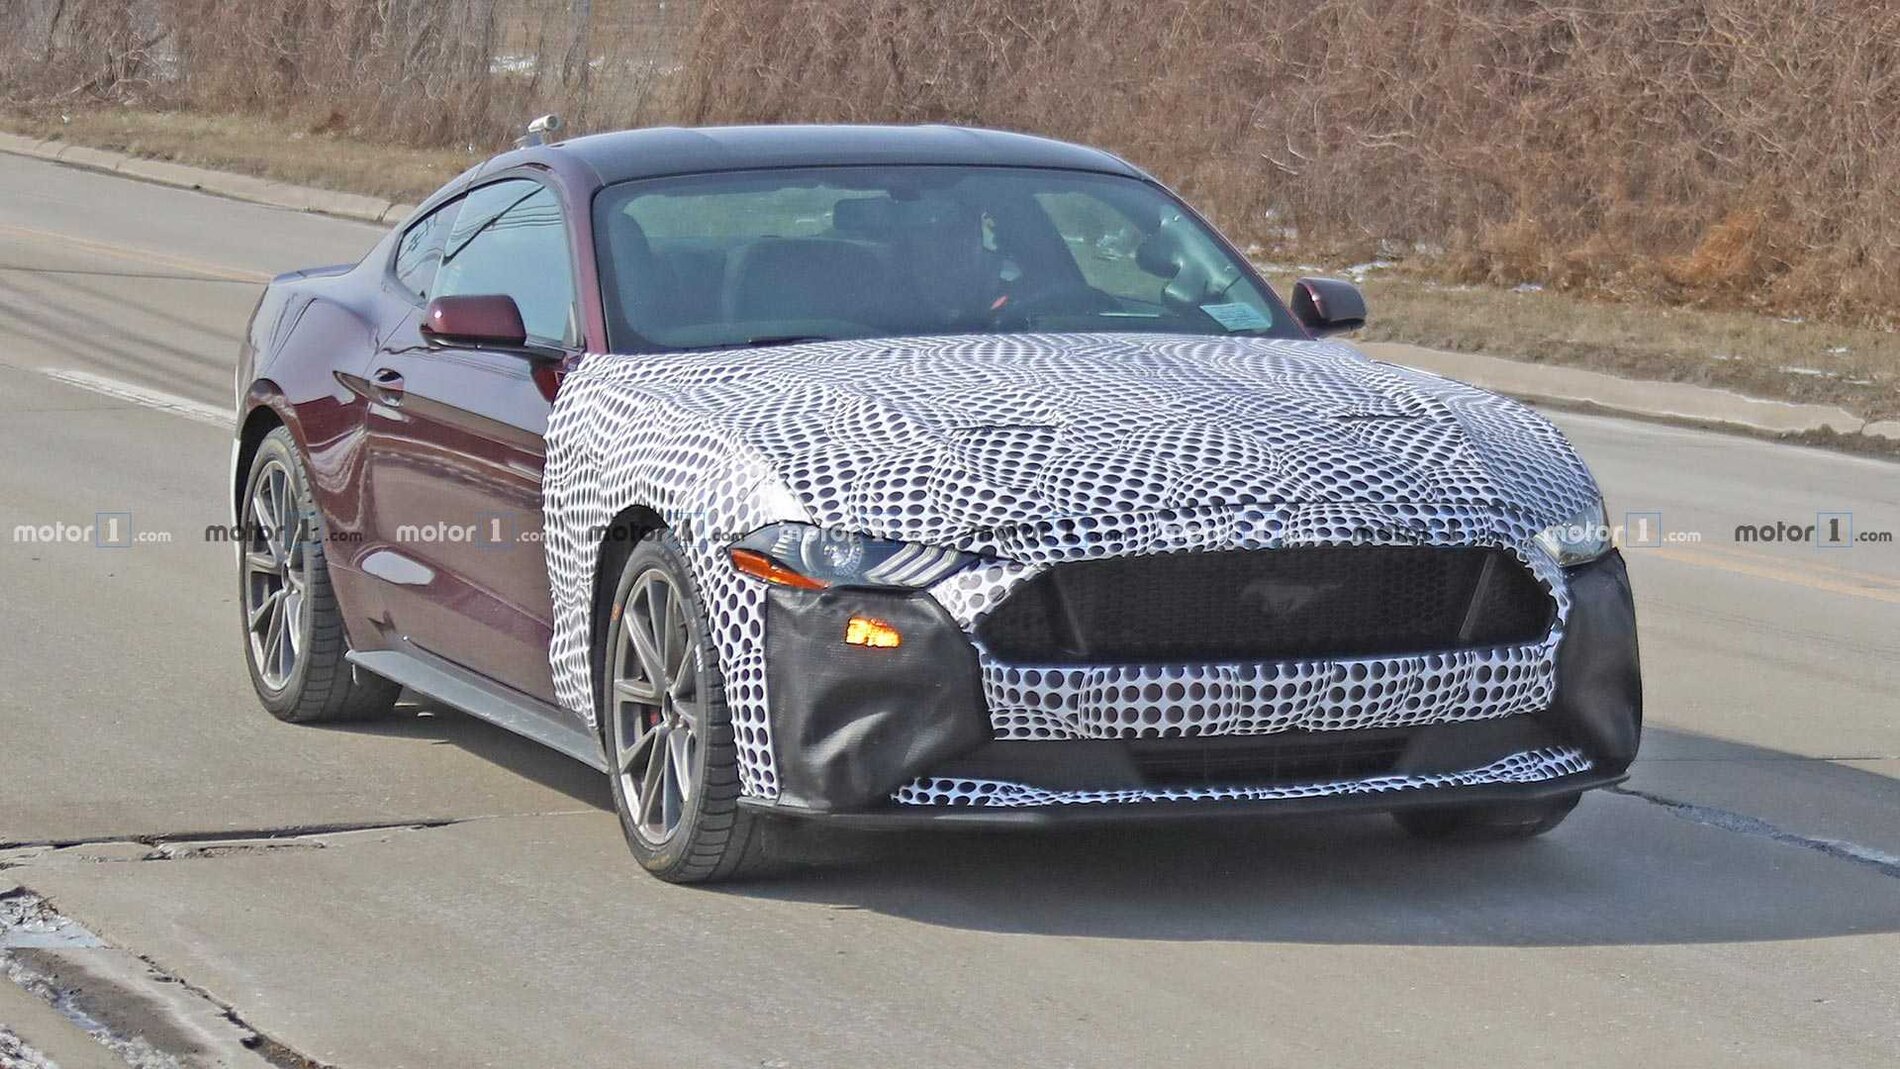 S650 Mustang Is this the first S650 test mule? S650 Prototype 1